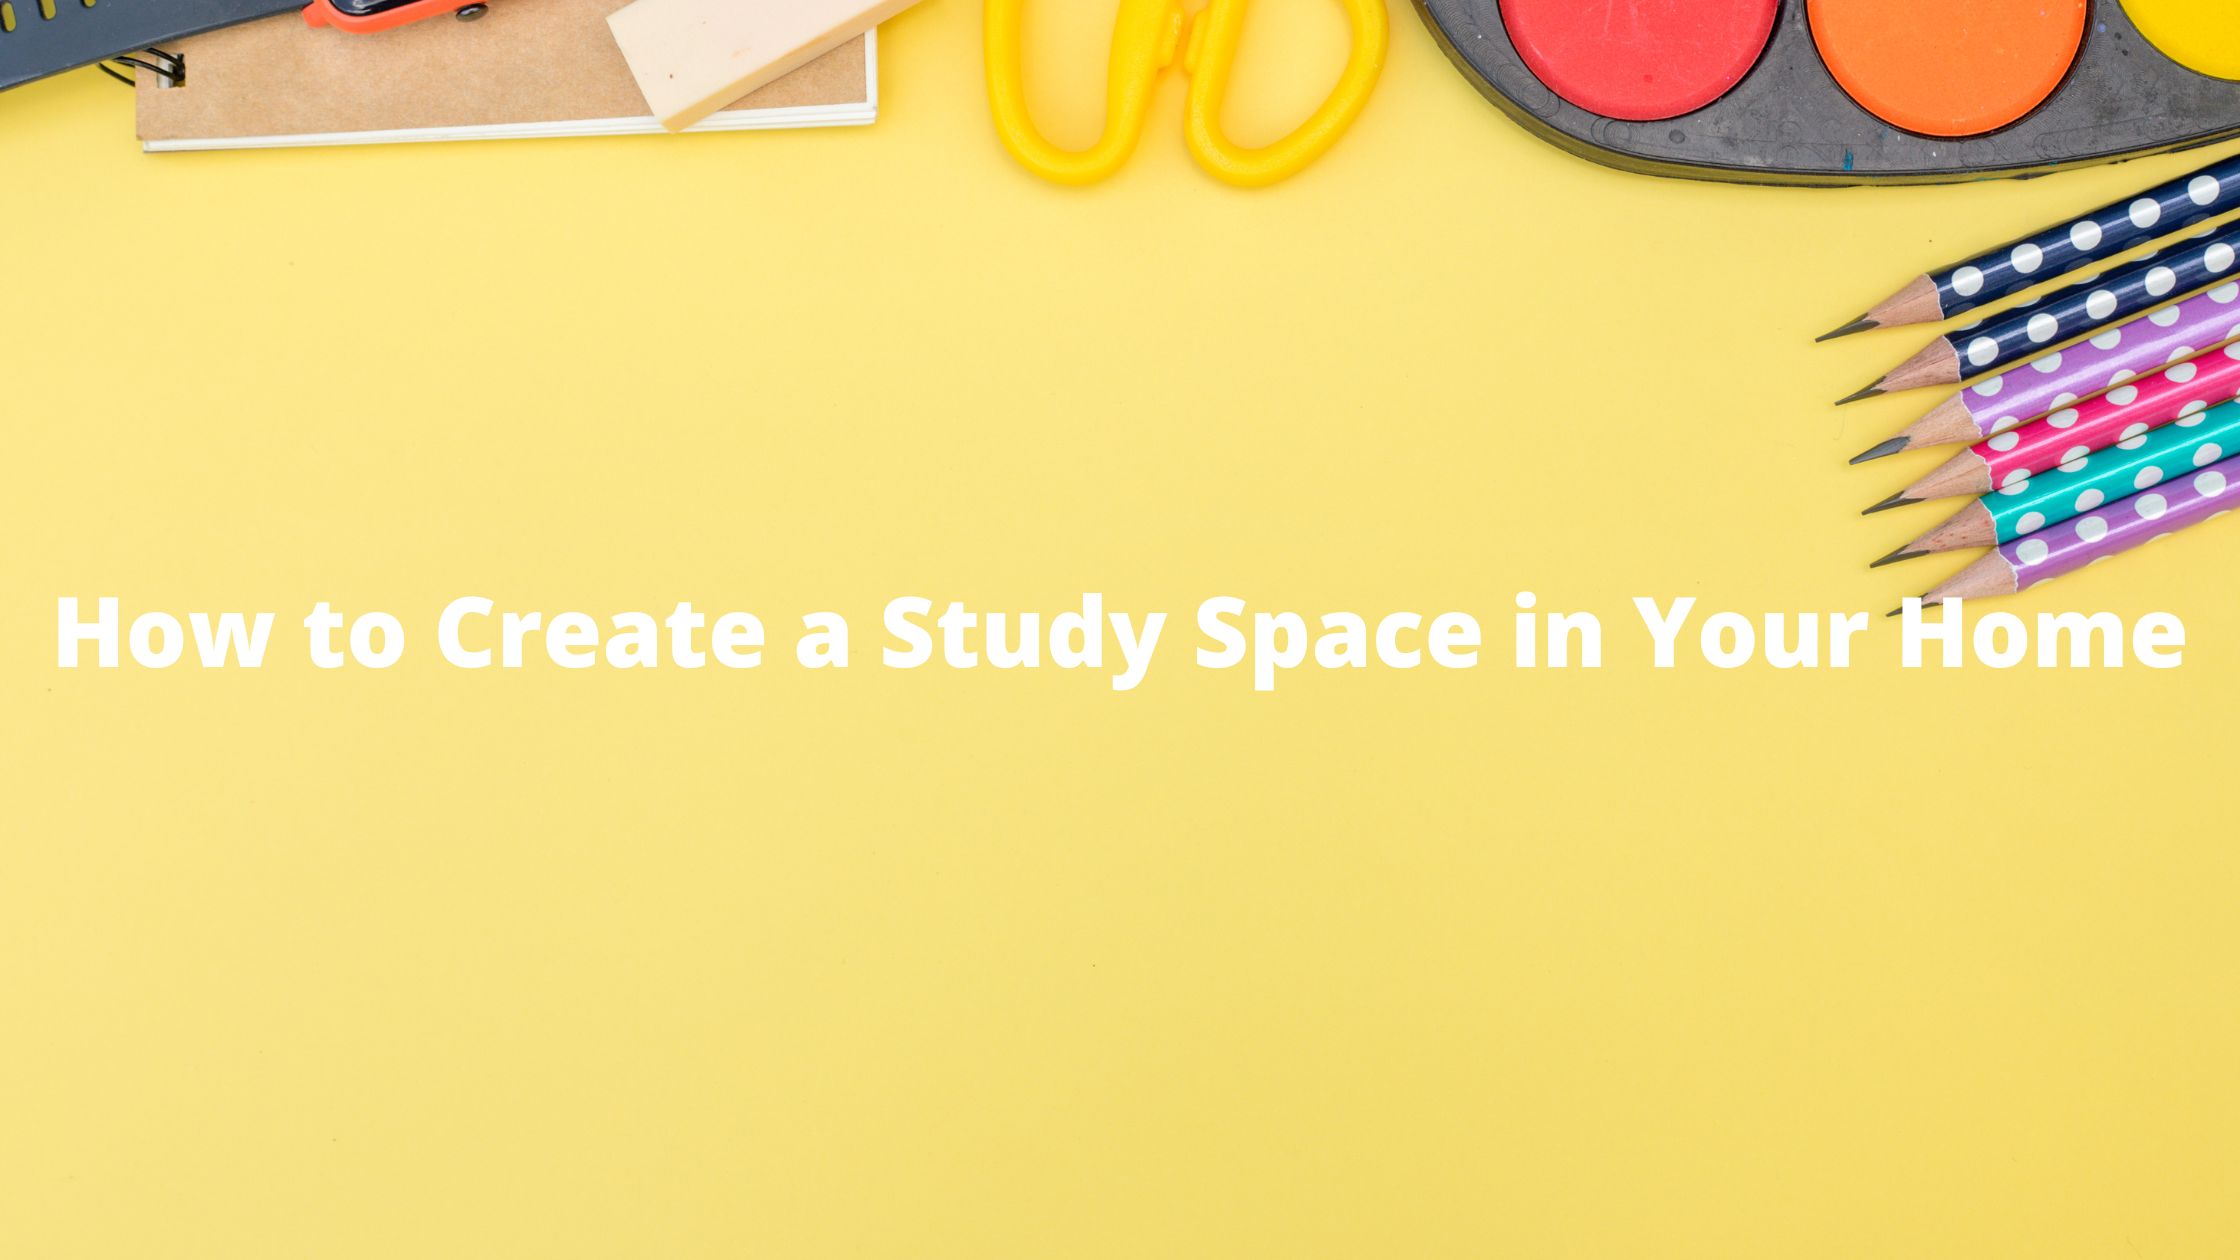 https://handymanconnection.com/wp-content/uploads/2022/08/How-to-Create-a-Study-Space-in-Your-Home.jpg